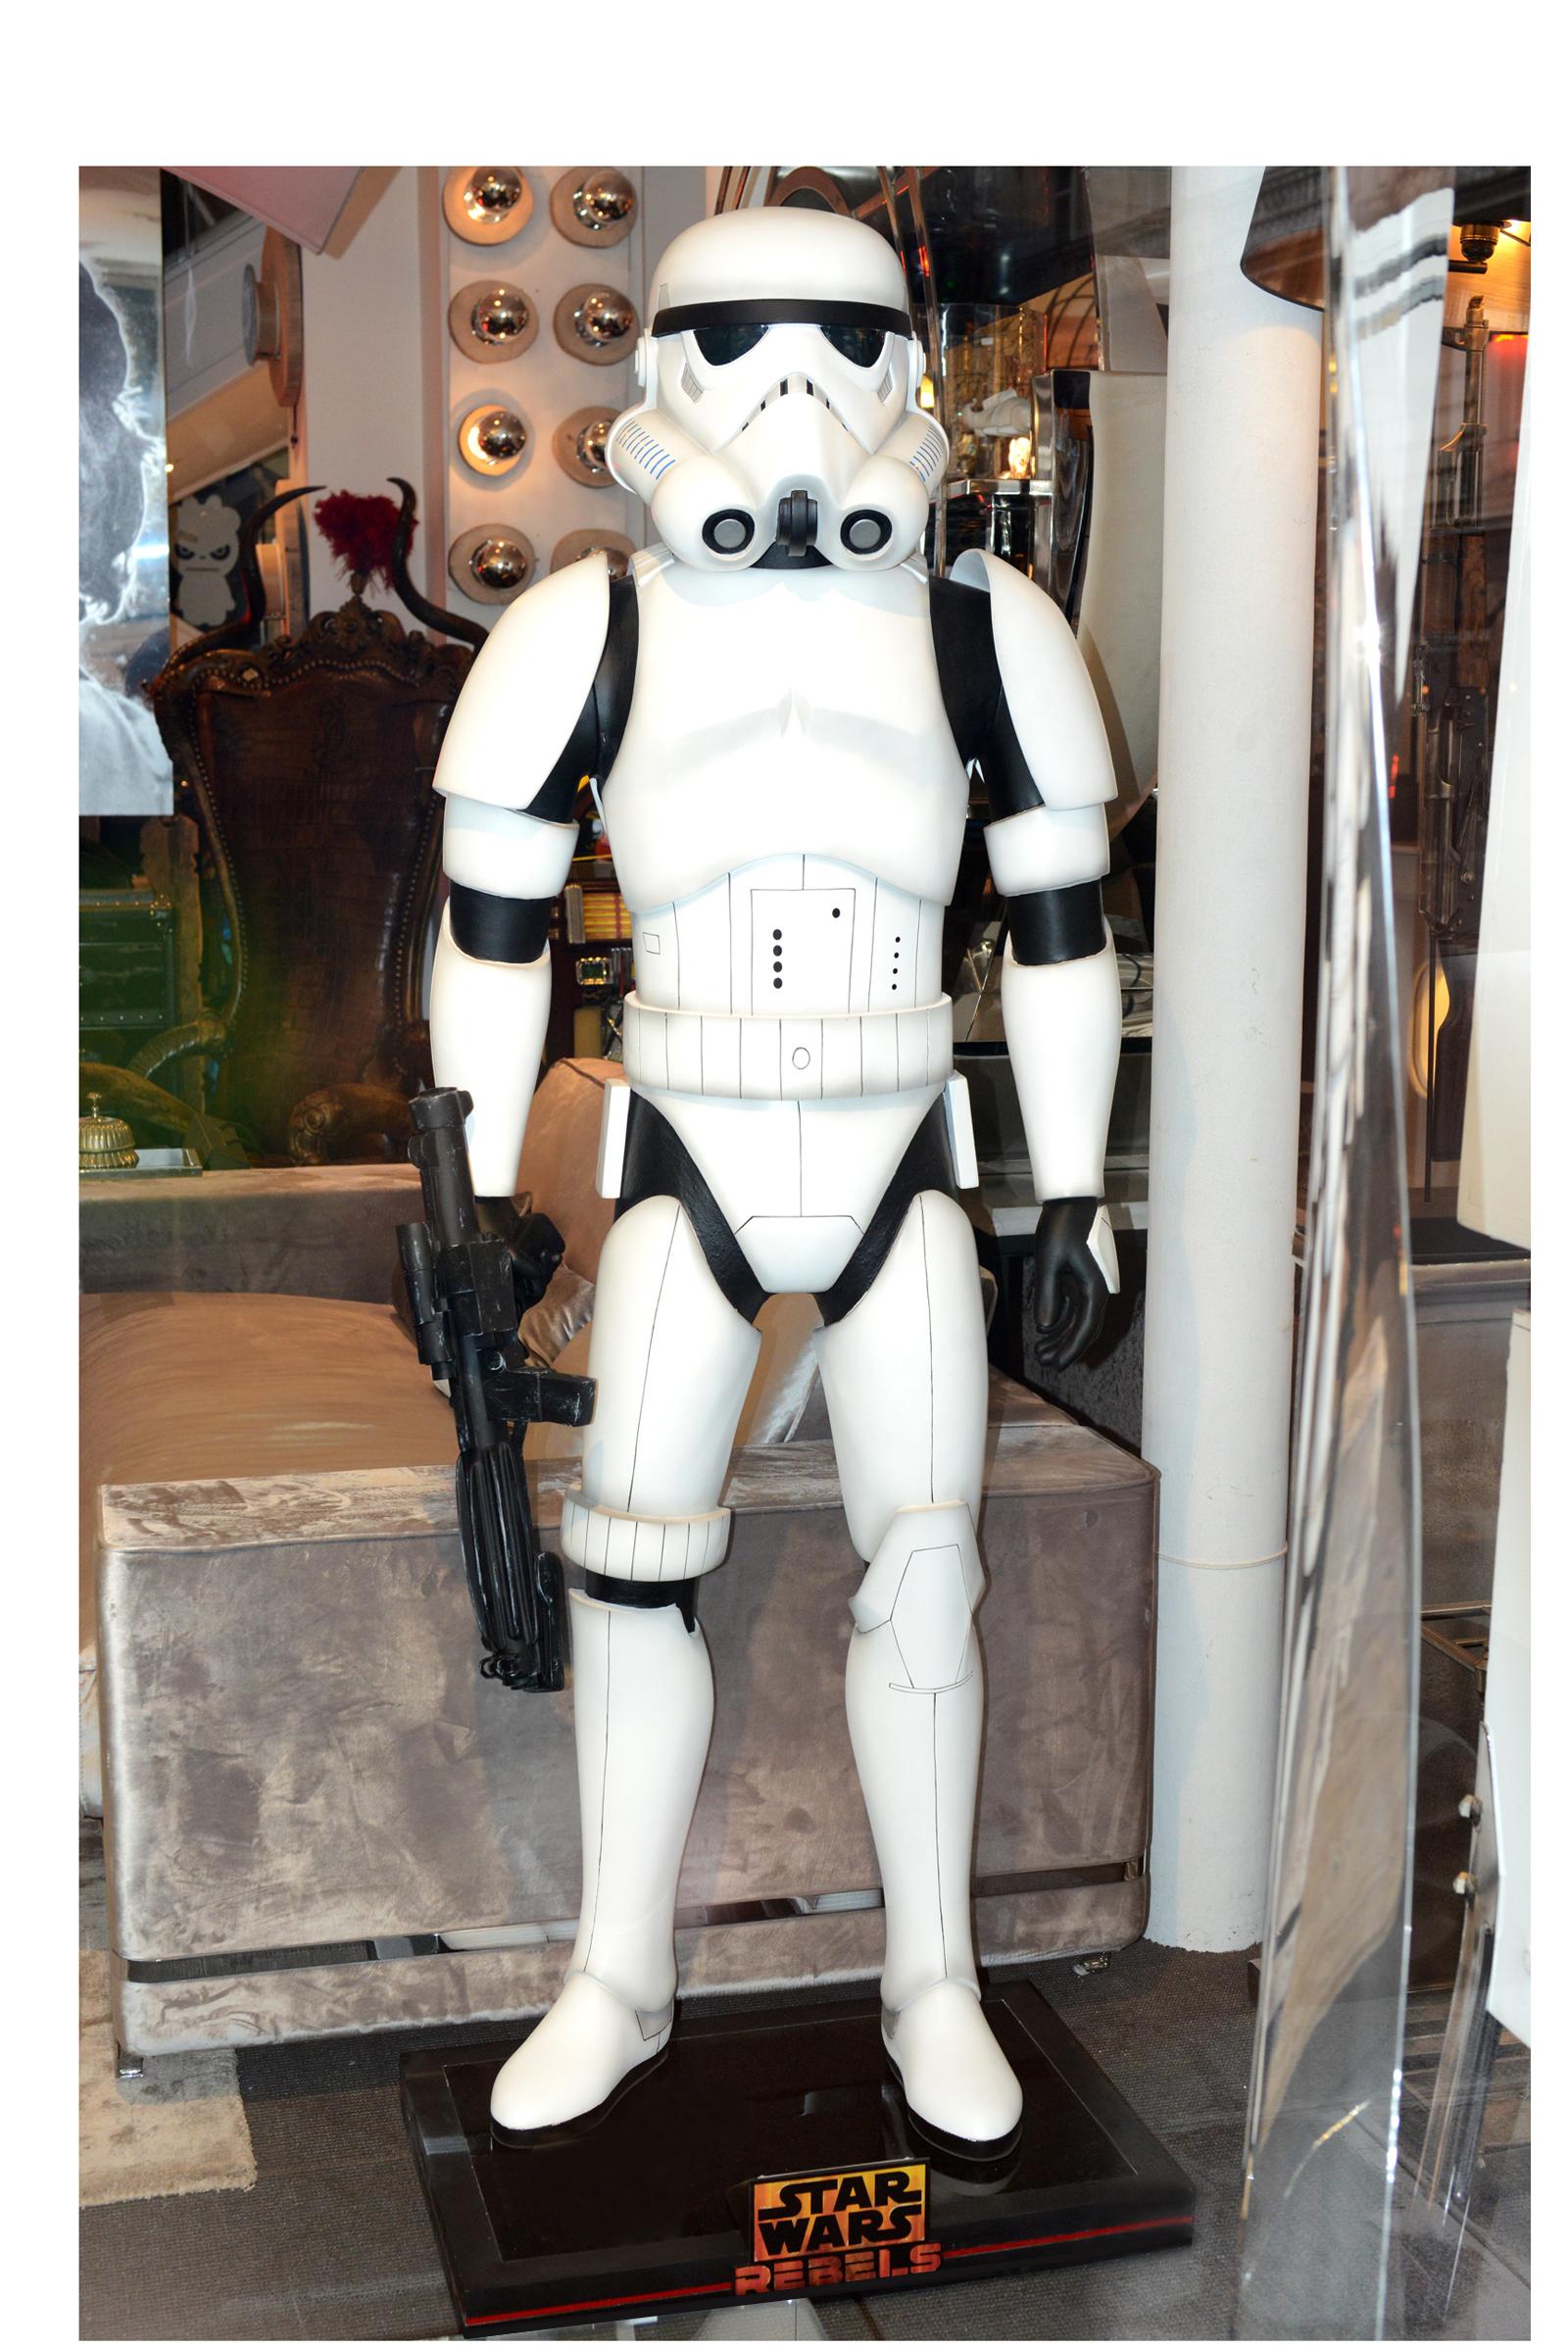 Stormtrooper with straight arm life-size star wars, licensed figure,
Lucas film, in limited edition 333 pieces. In fiberglass.